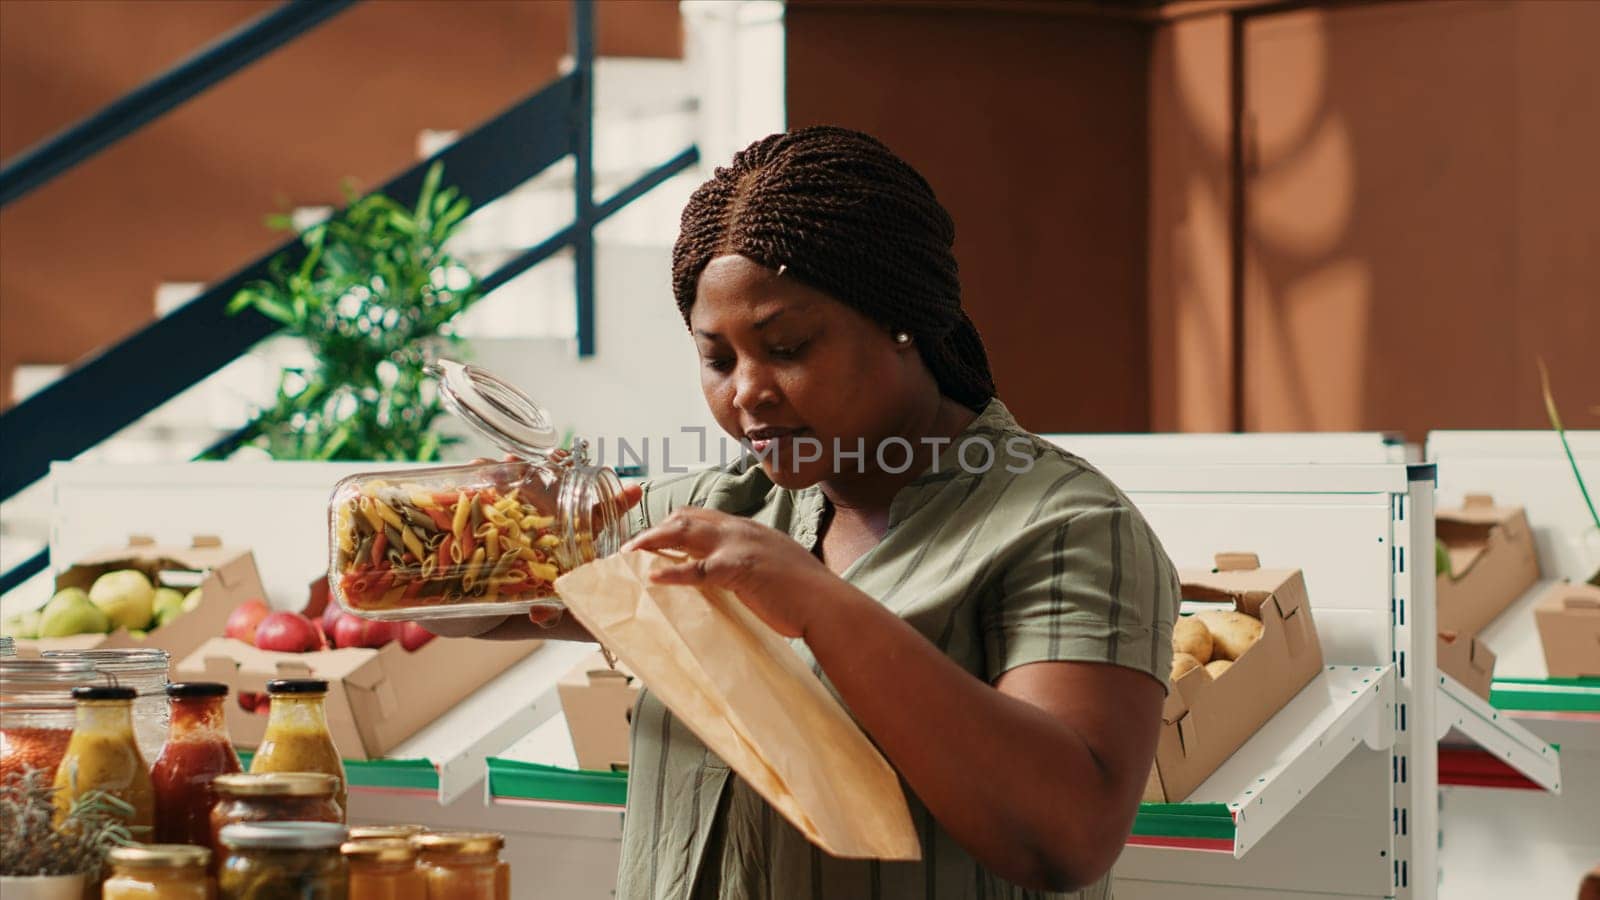 Customer pouring a type of pasta in ecological paper bag by DCStudio